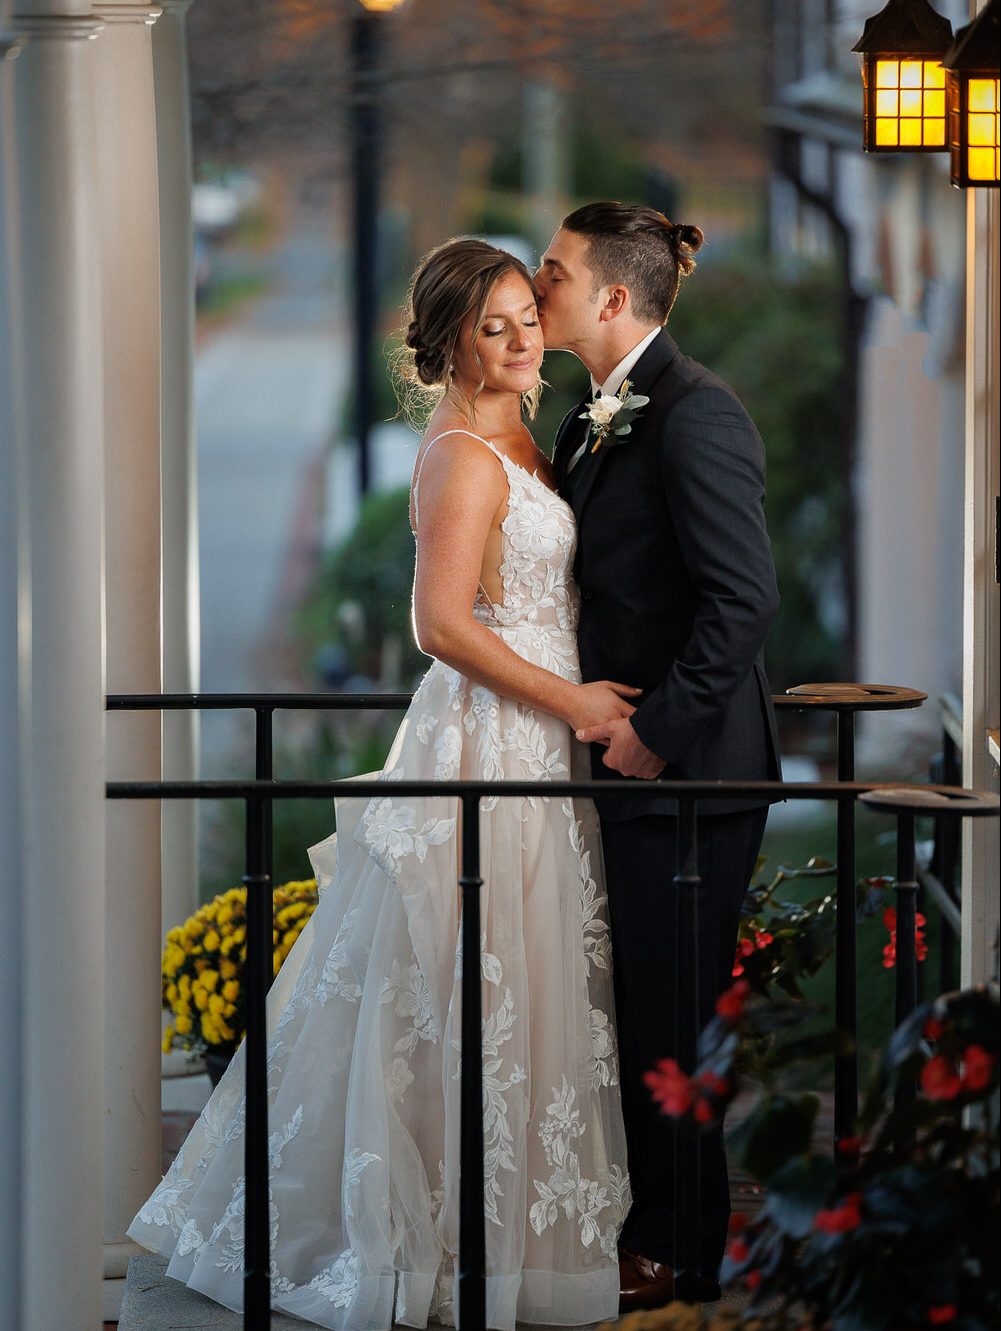 A bride and groom share a kiss on a balcony adorned with flowers, with streetlights and trees in the background at dusk, captured by Western Ma Wedding Photography.